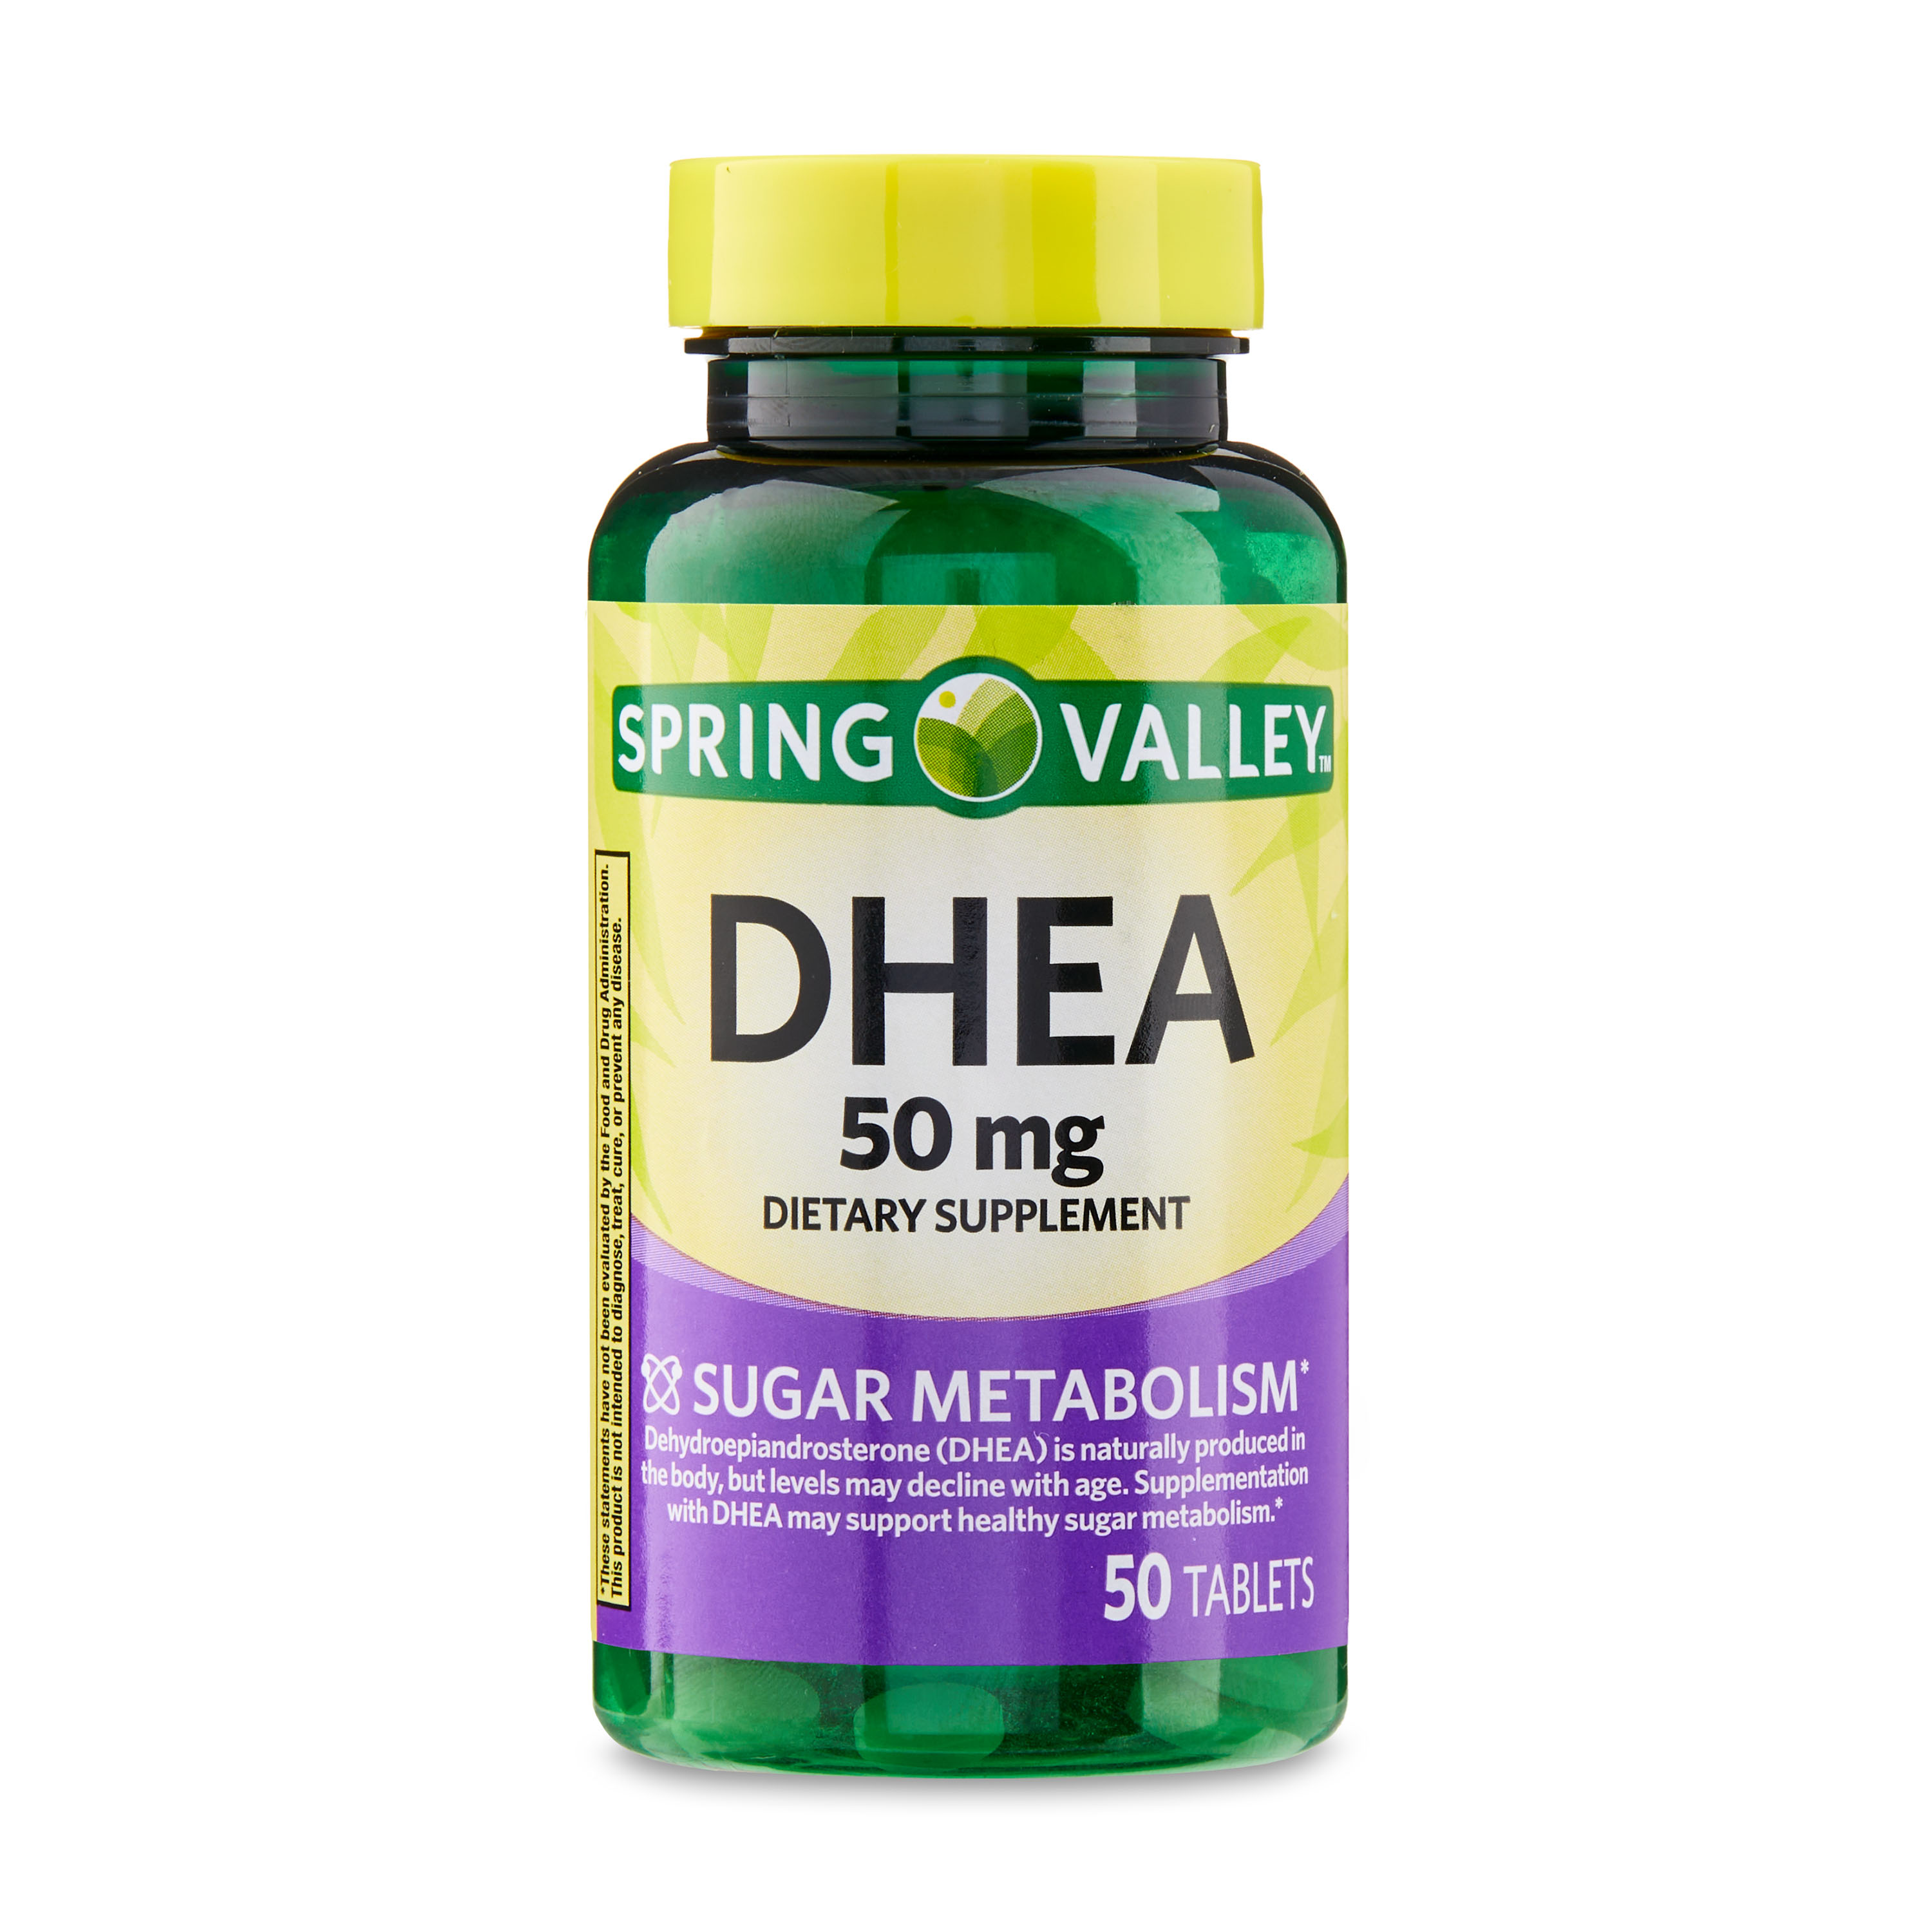 Spring Valley DHEA Tablets, 50 mg, 50 Count - image 1 of 10